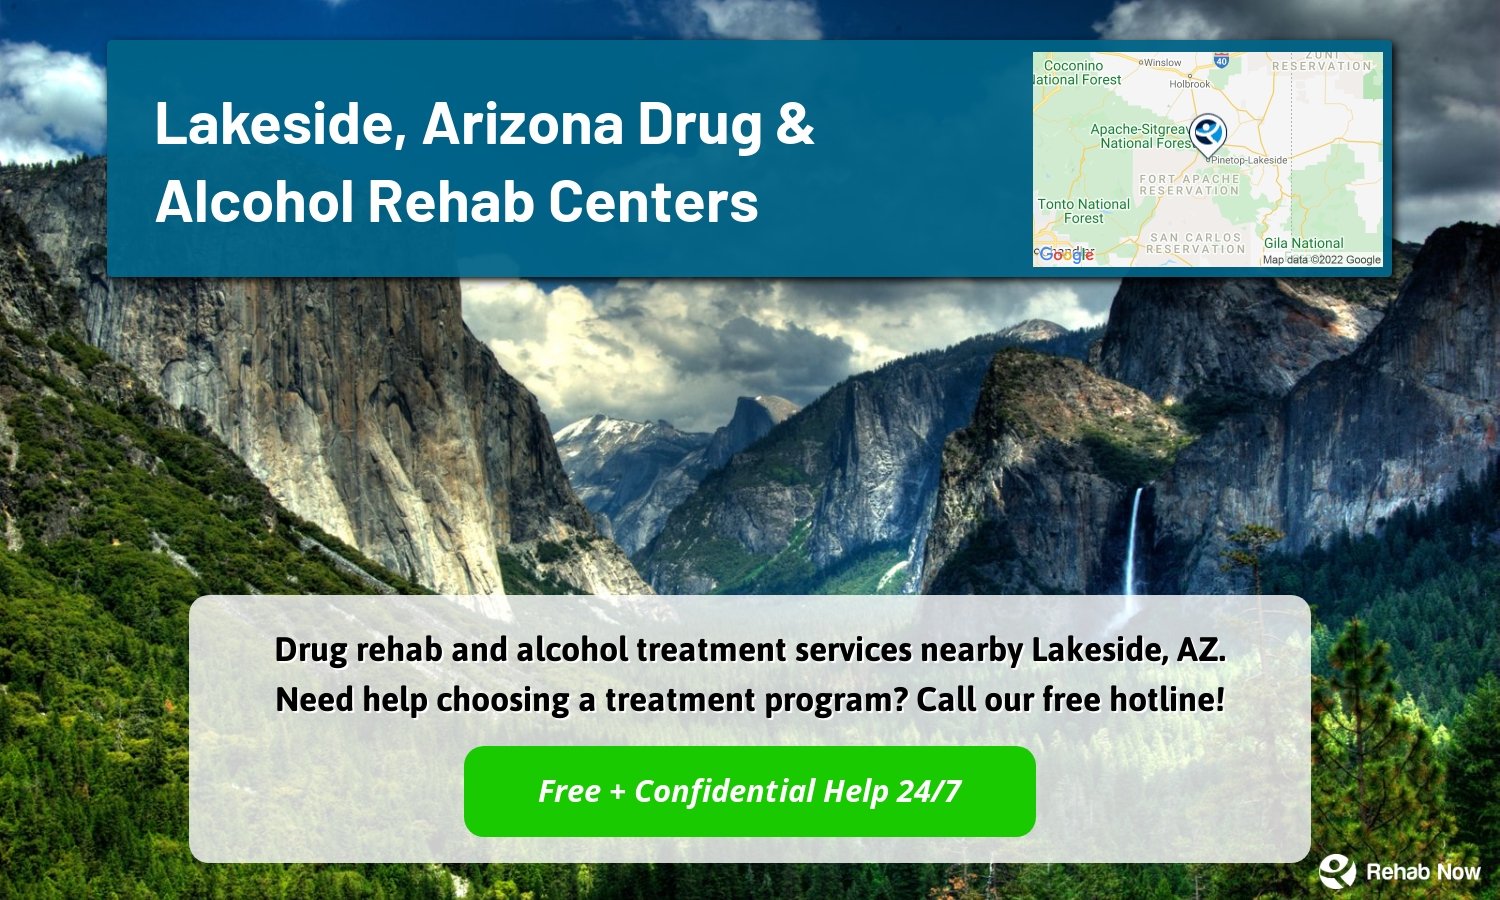 Drug rehab and alcohol treatment services nearby Lakeside, AZ. Need help choosing a treatment program? Call our free hotline!